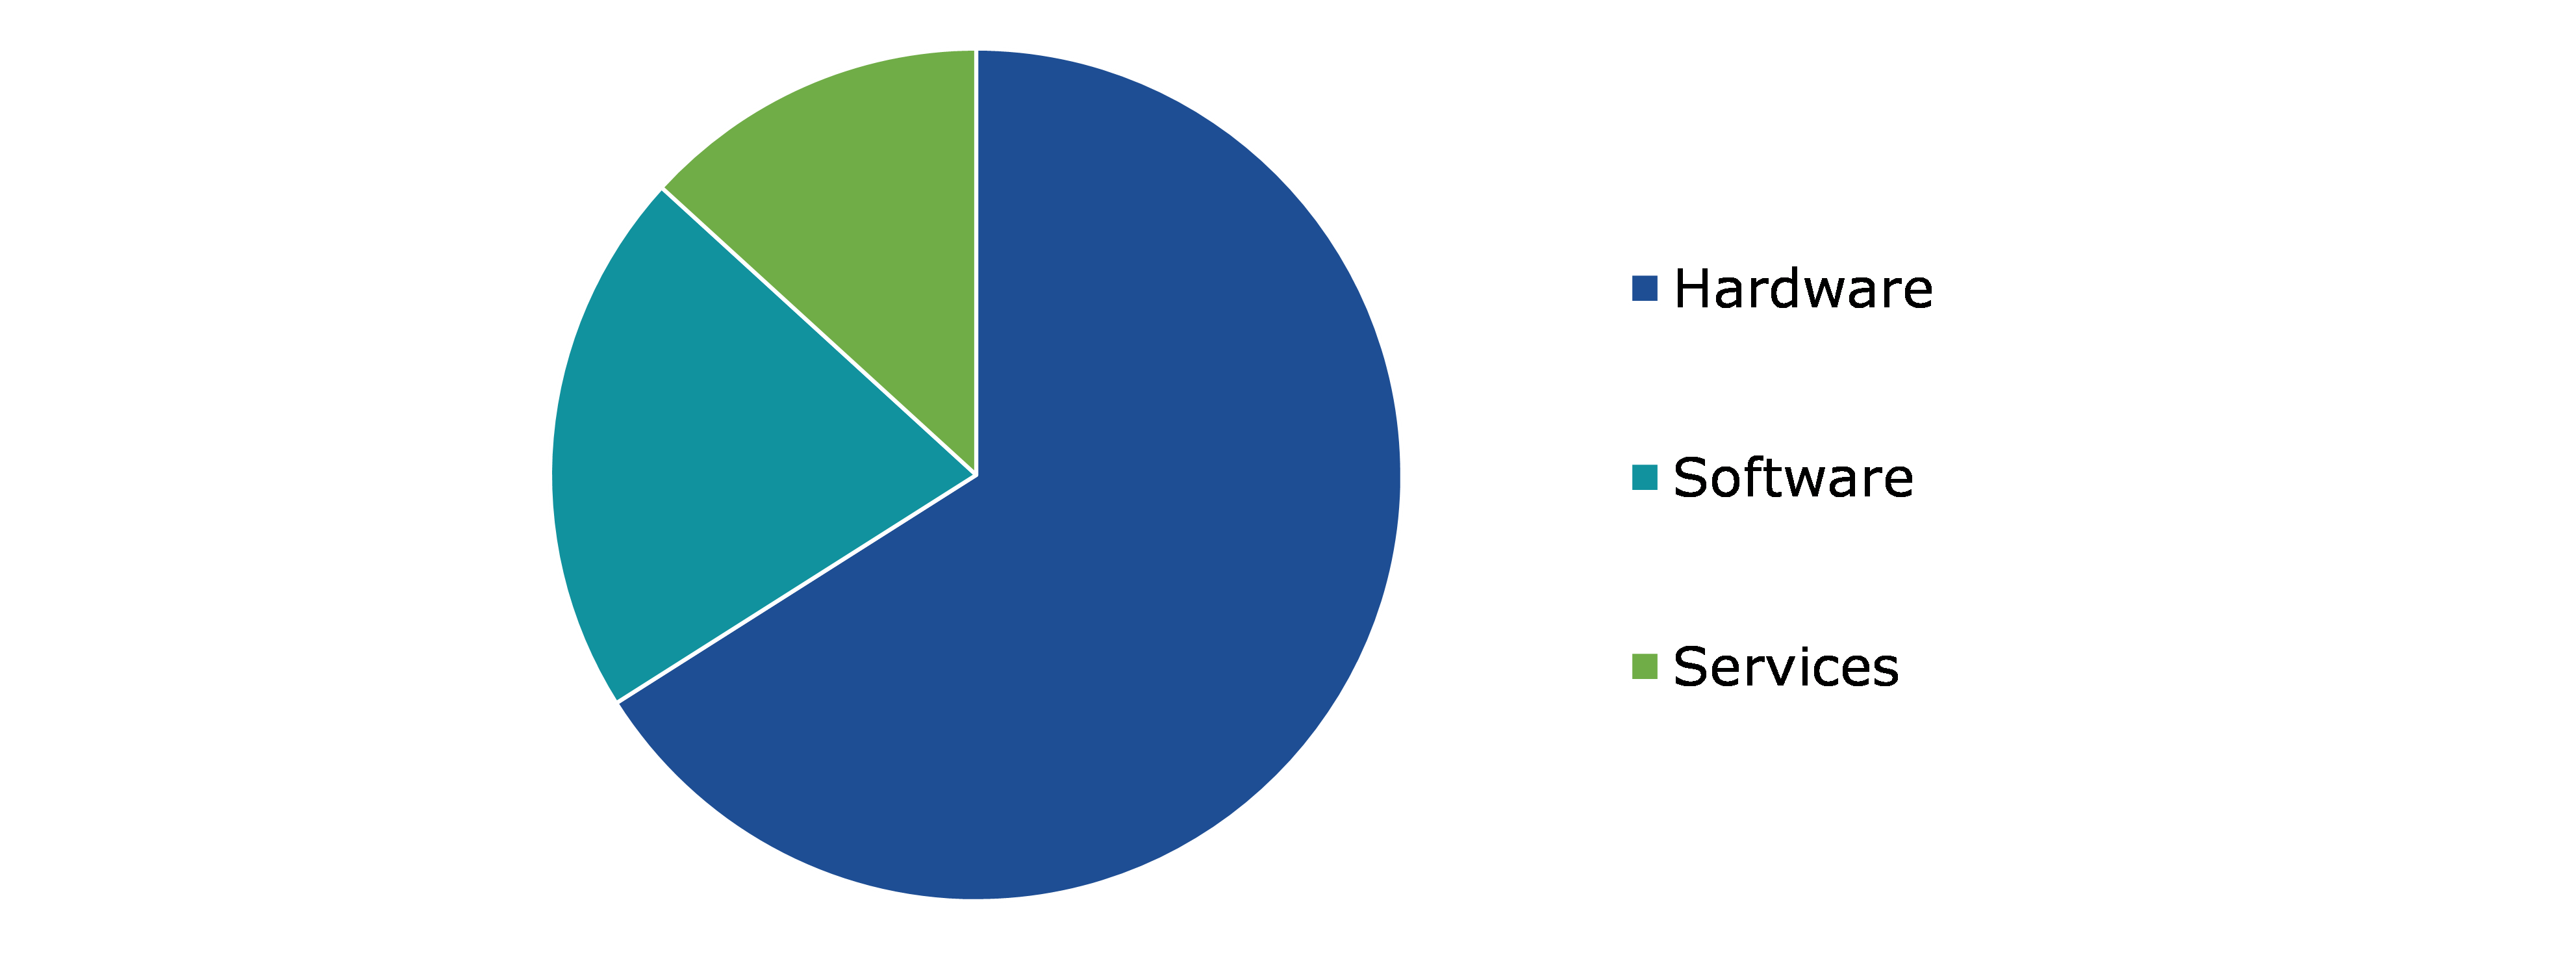 Global Automotive Ethernet Market Share, by Component	